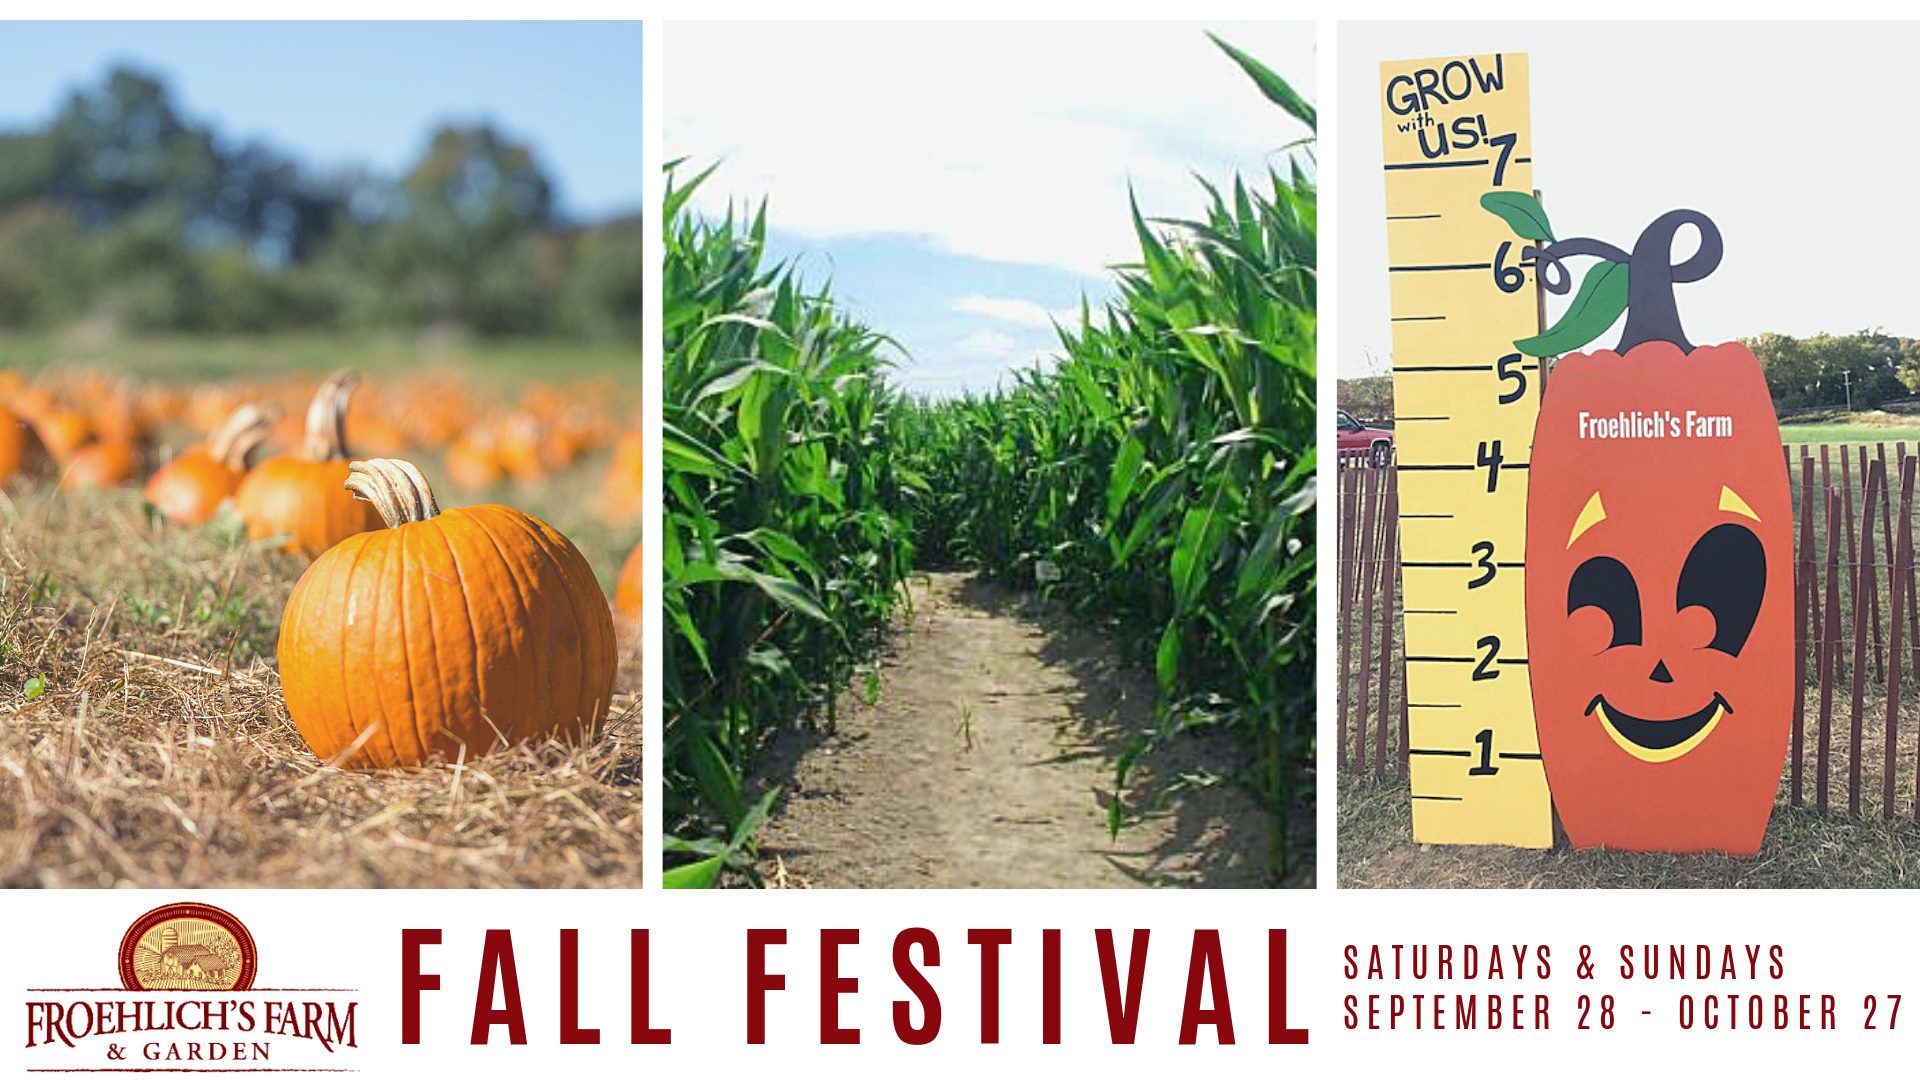 Froehlich's Farm Fall Festival Event September 28th to October 27th